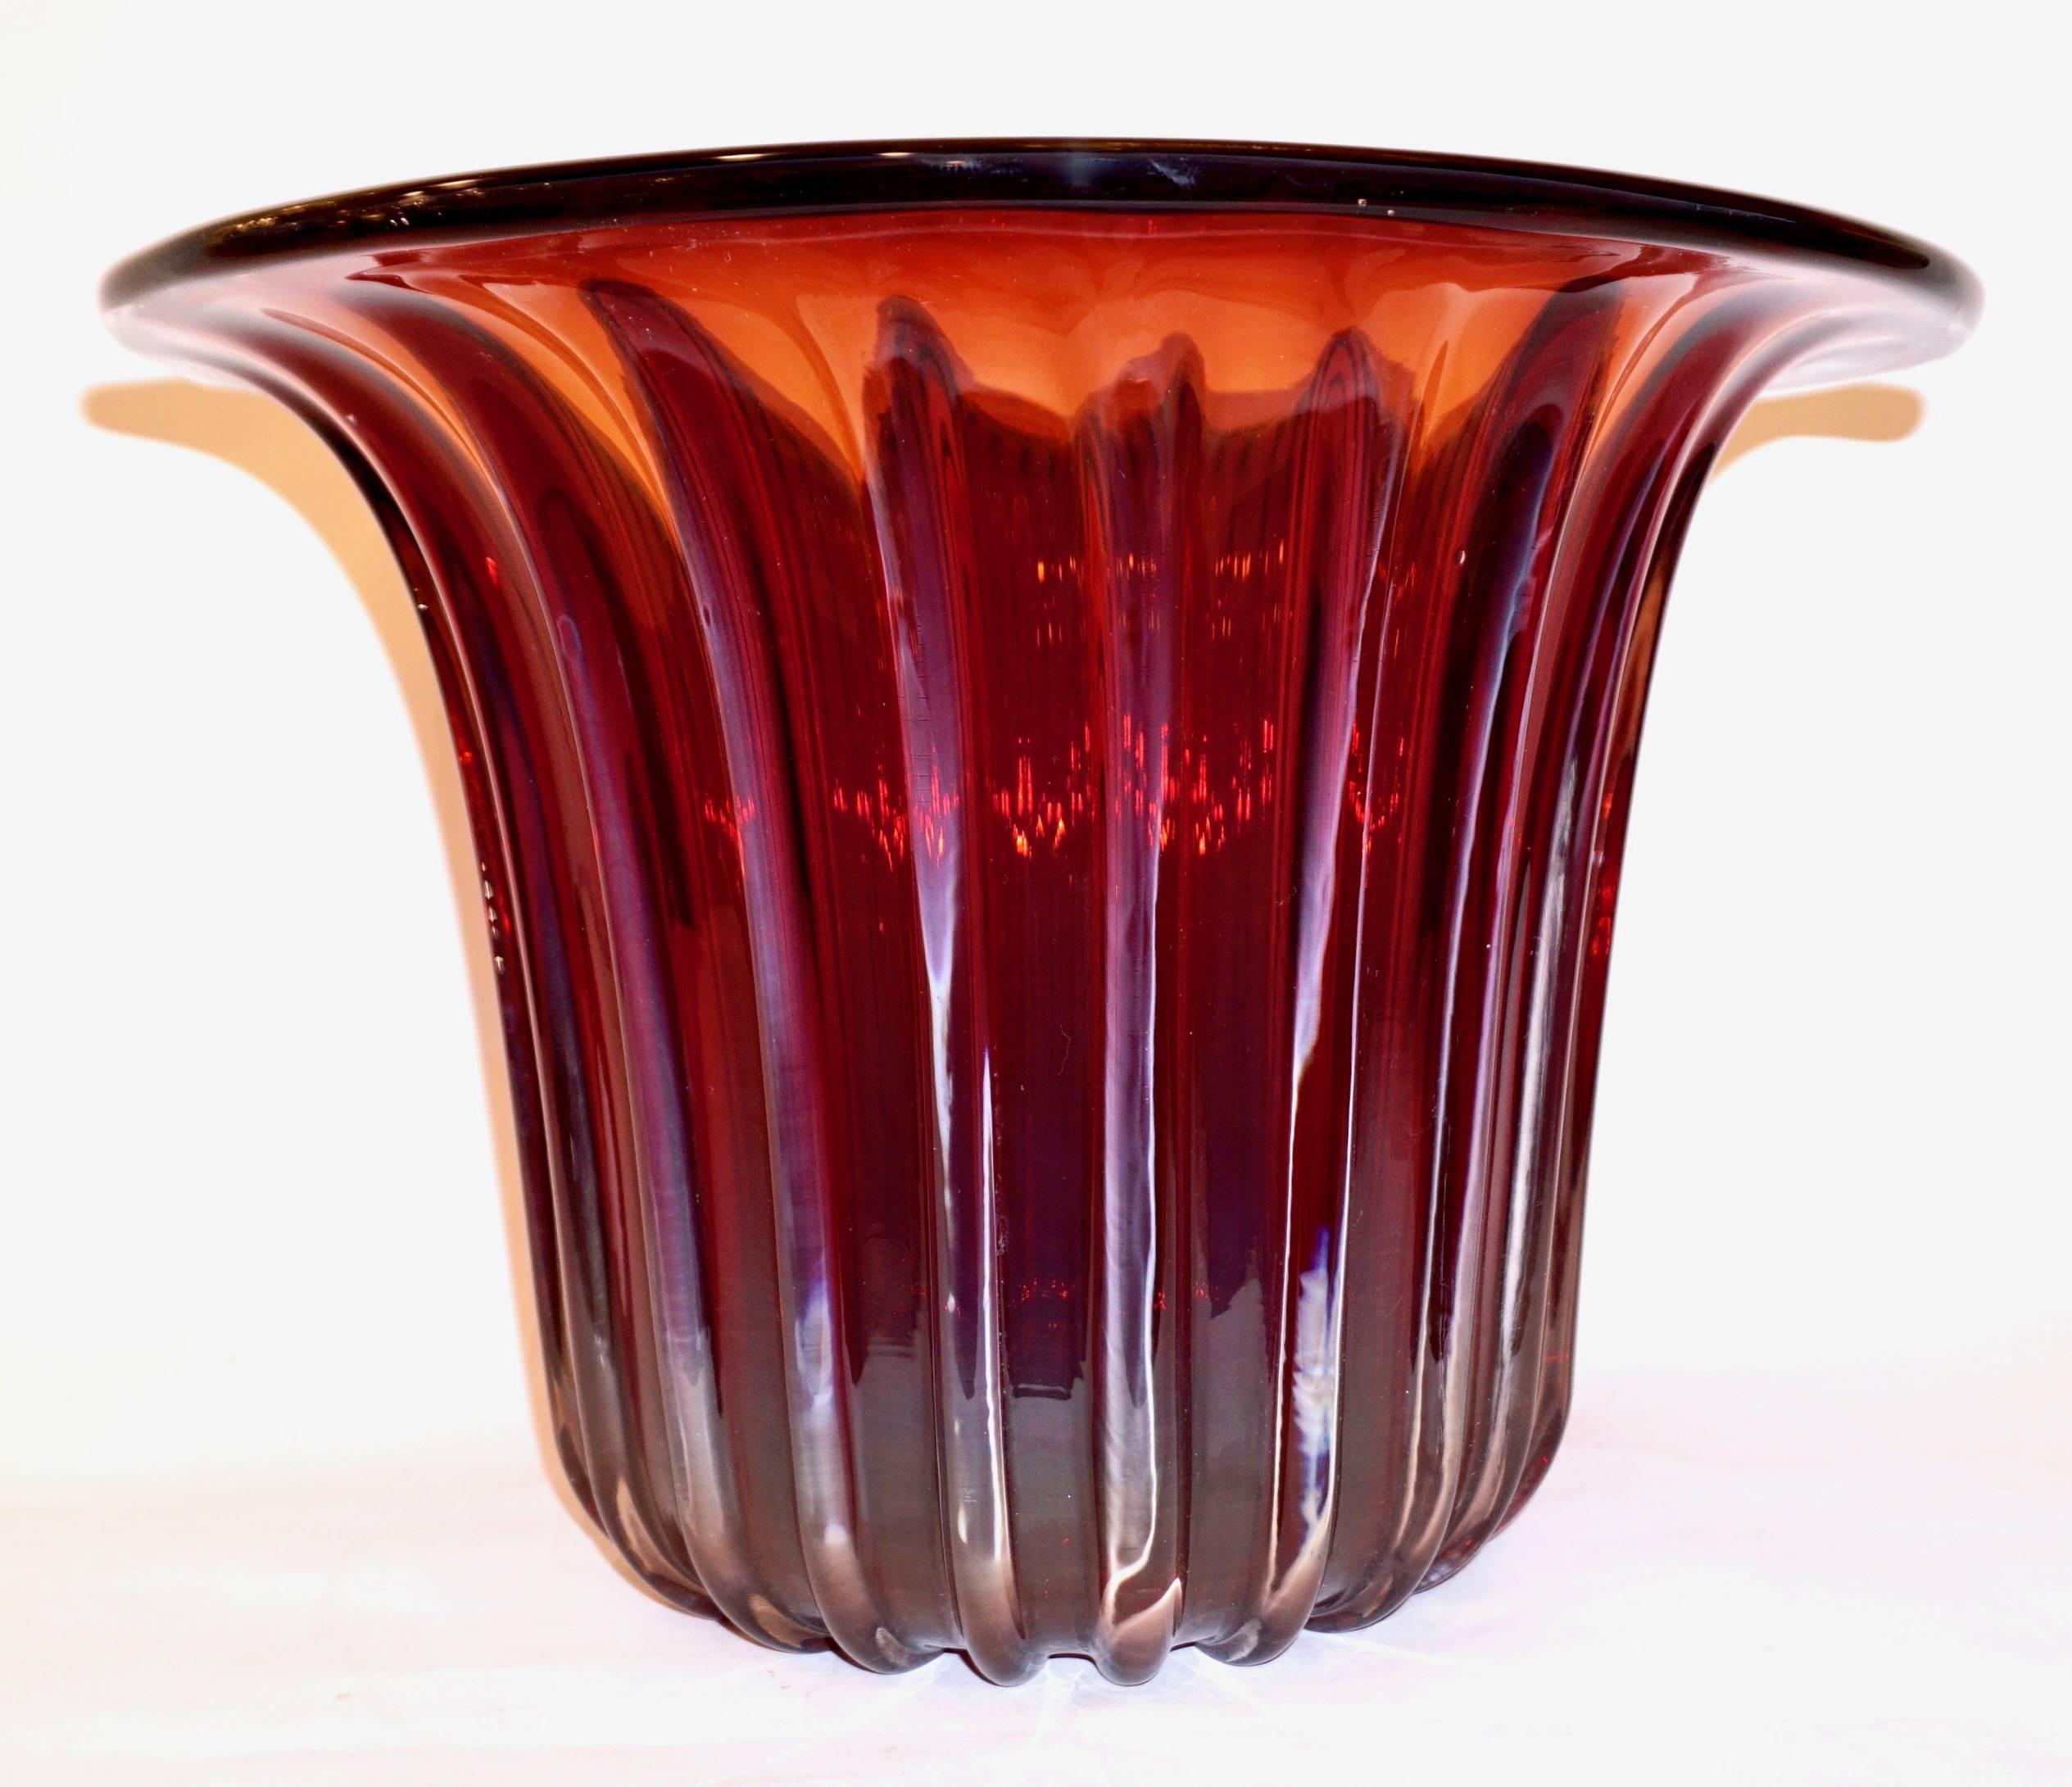 A striking pair of artistic blown Murano glass vases or bowls, imposing for their size, signed by Mattia Toso, executed by Pino Signoretto Studio. The cornelian red color is very rich and shows golden orange reflections when hit by a light source,